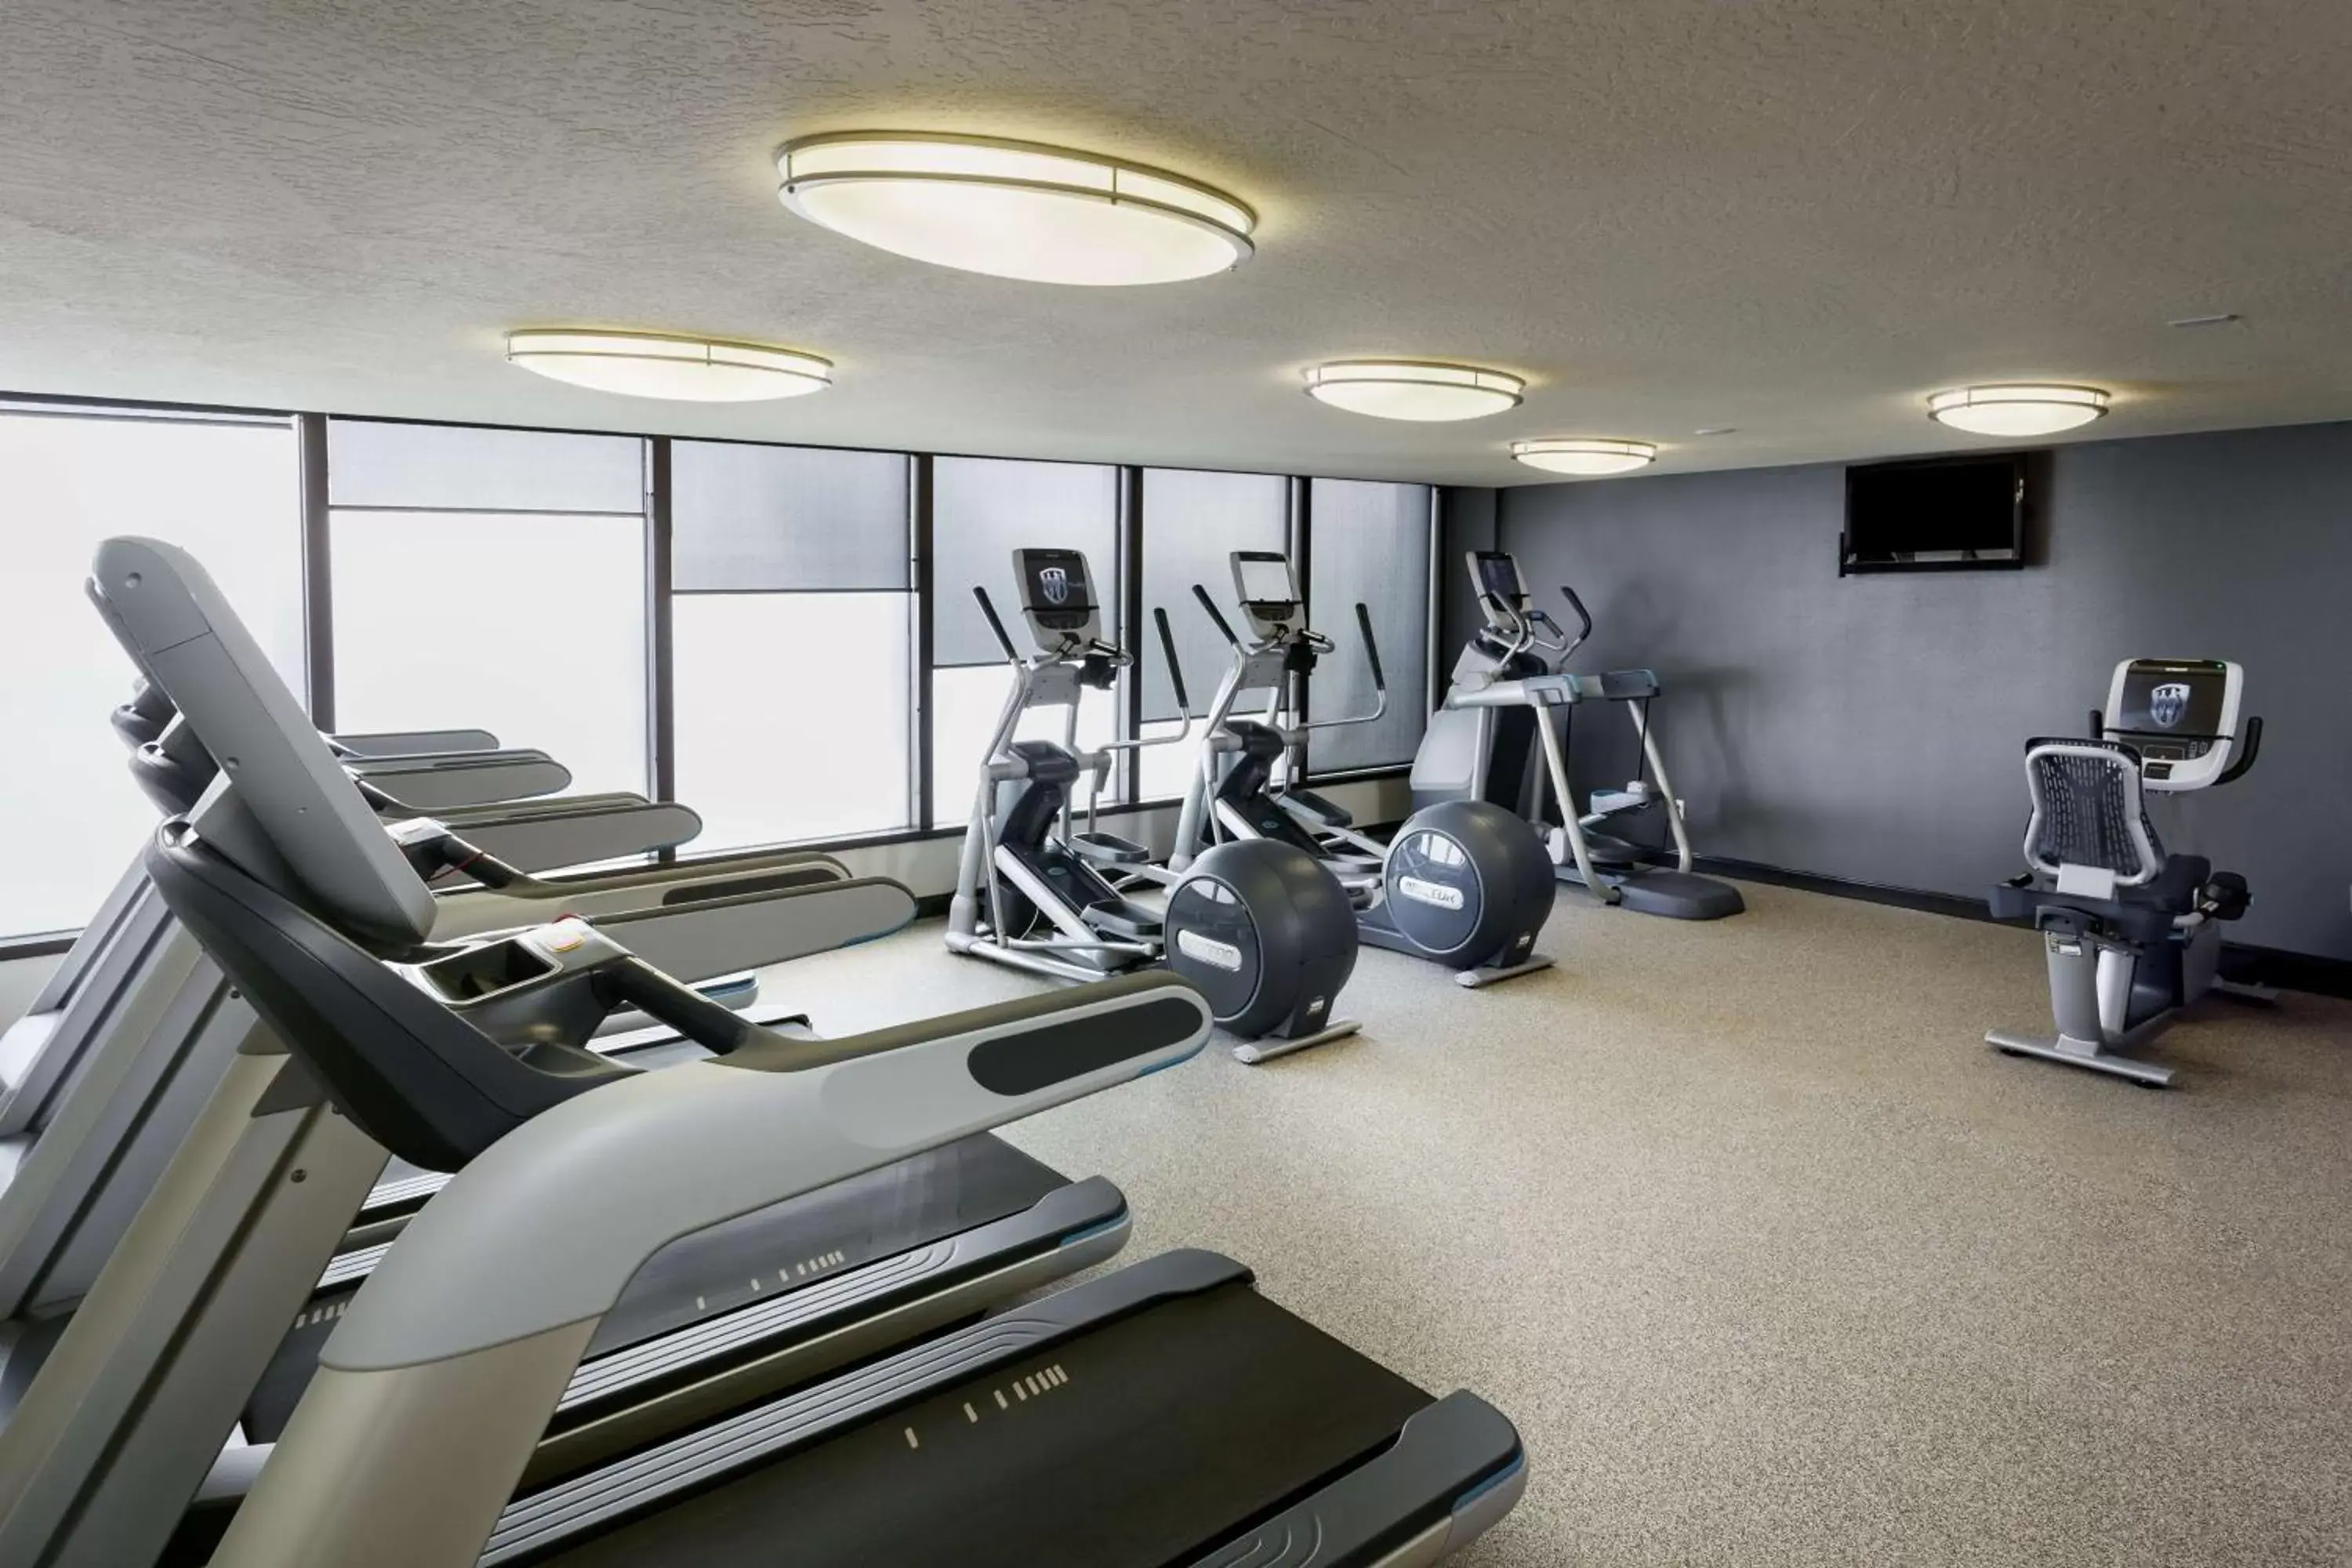 Fitness centre/facilities, Fitness Center/Facilities in Doubletree By Hilton Billings